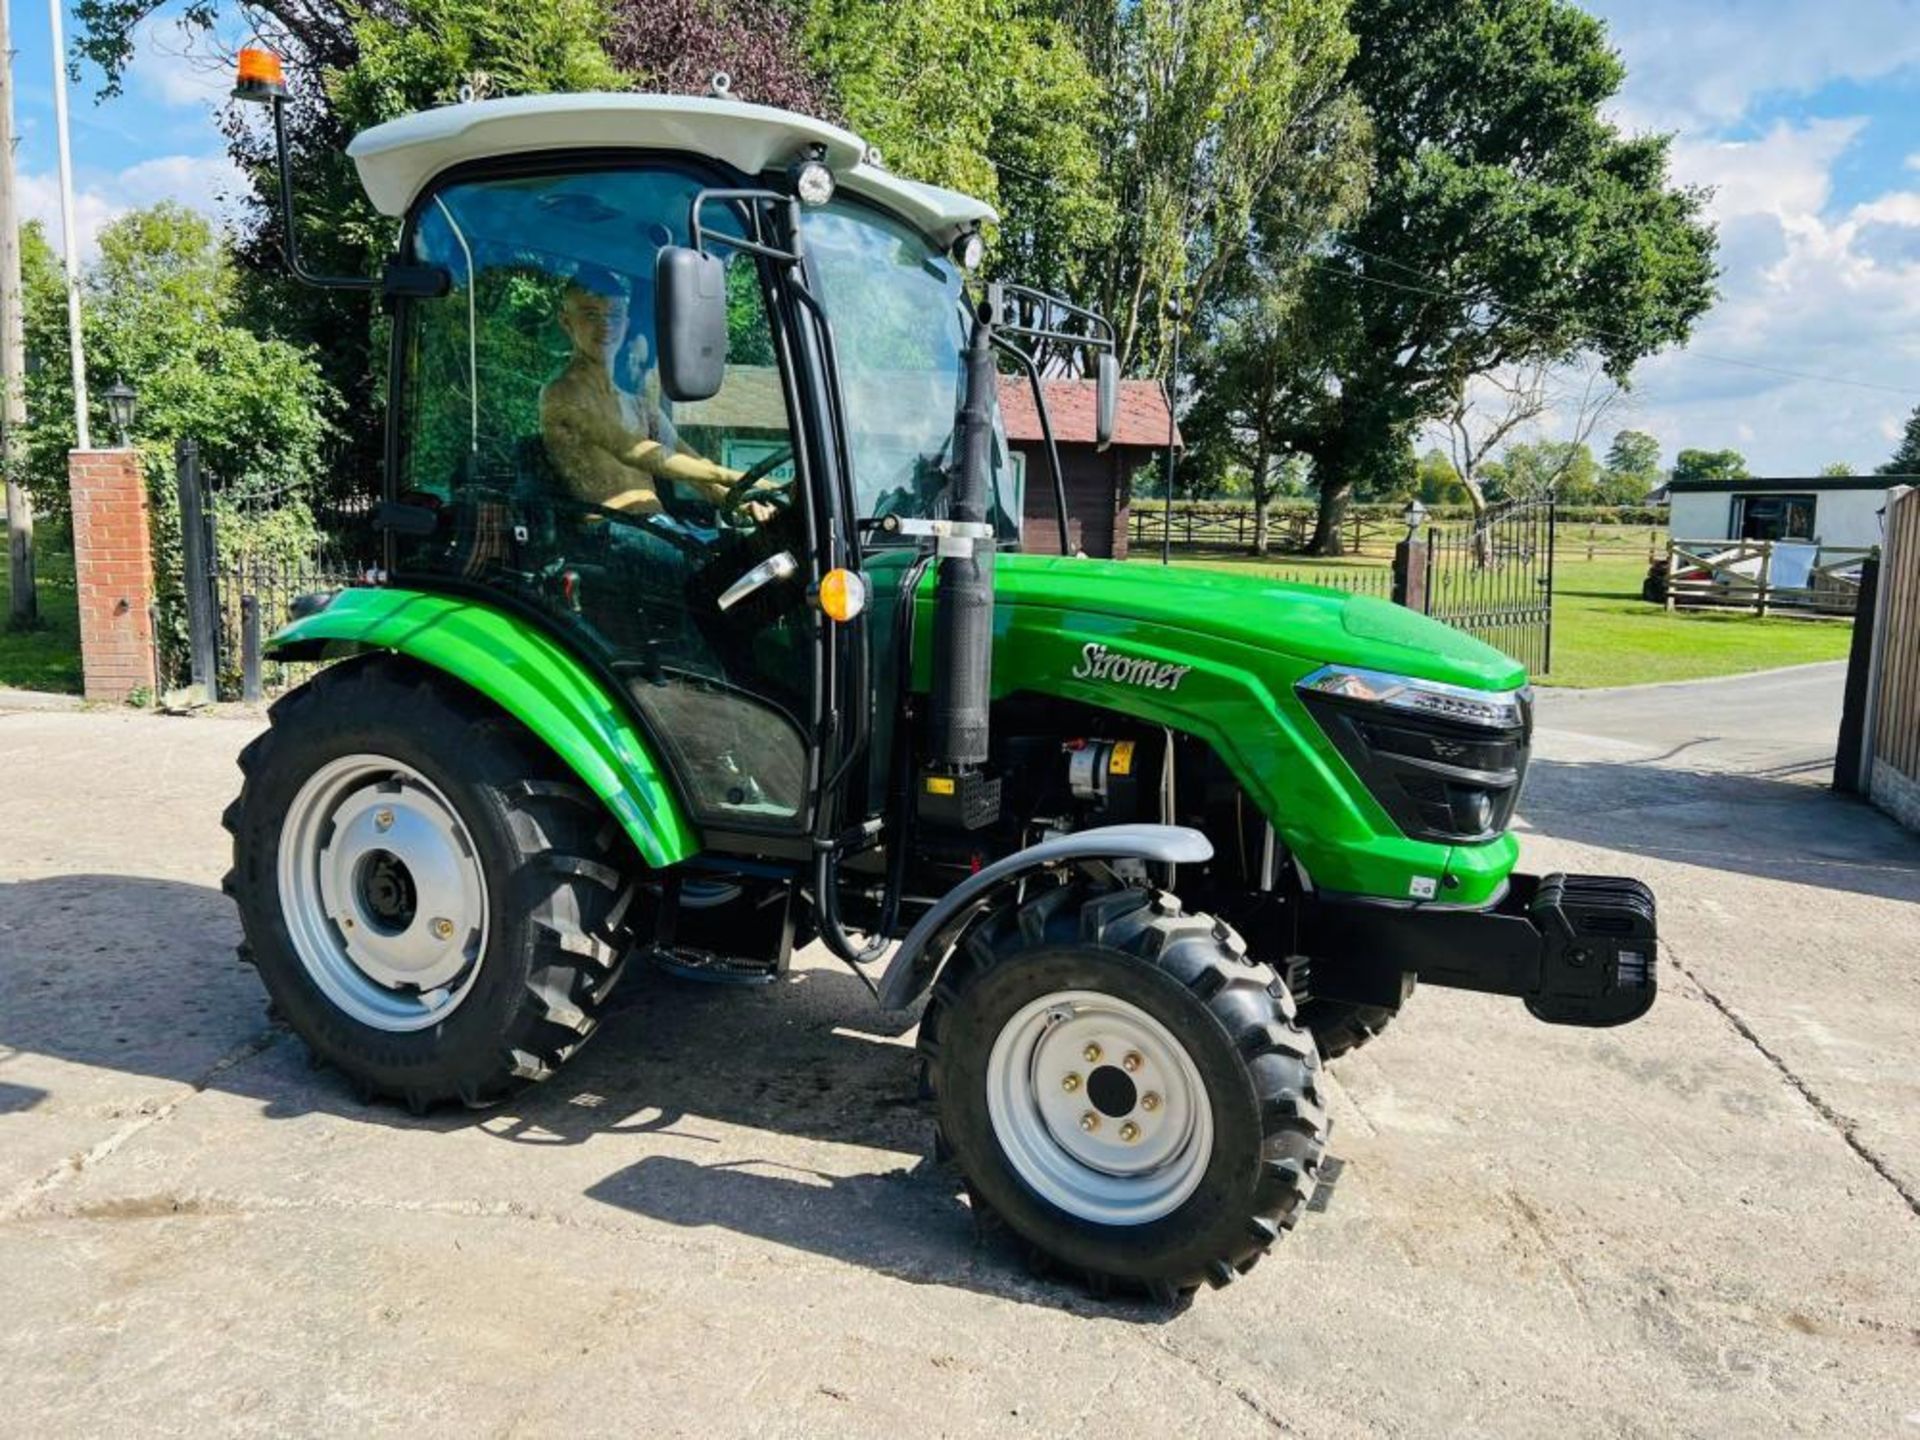 ** BRAND NEW SIROMER 404 4WD TRACTOR WITH SYNCHRO CAB **